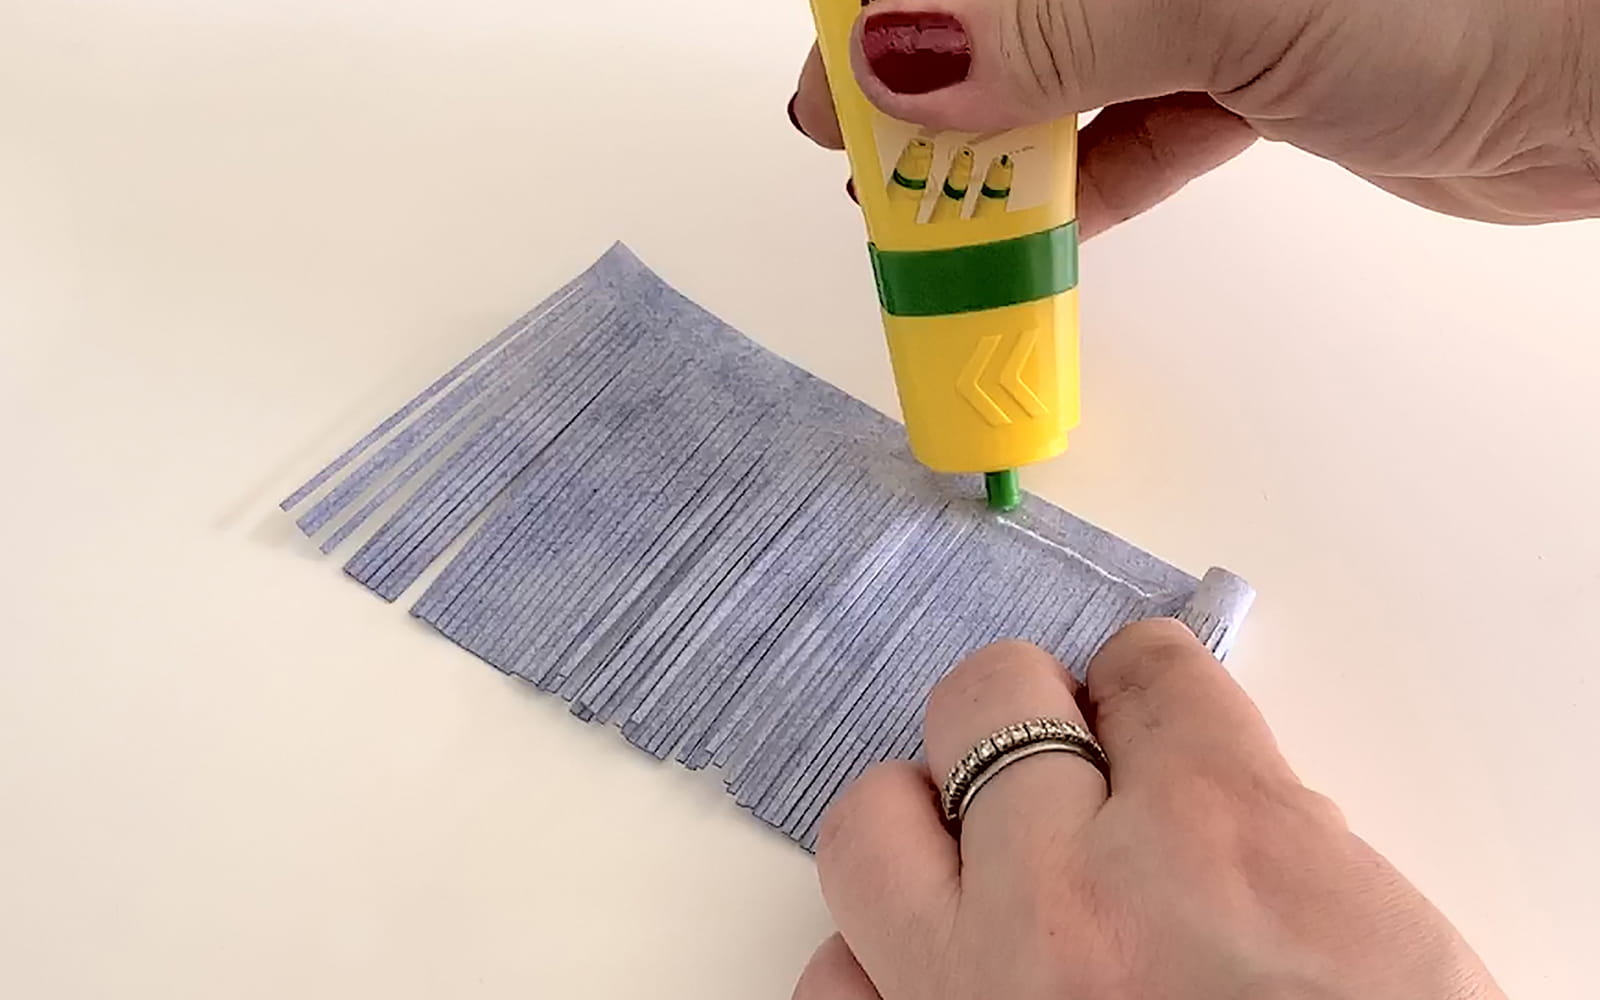 Yellow tube of liquid glue being squeezed onto blue tassel